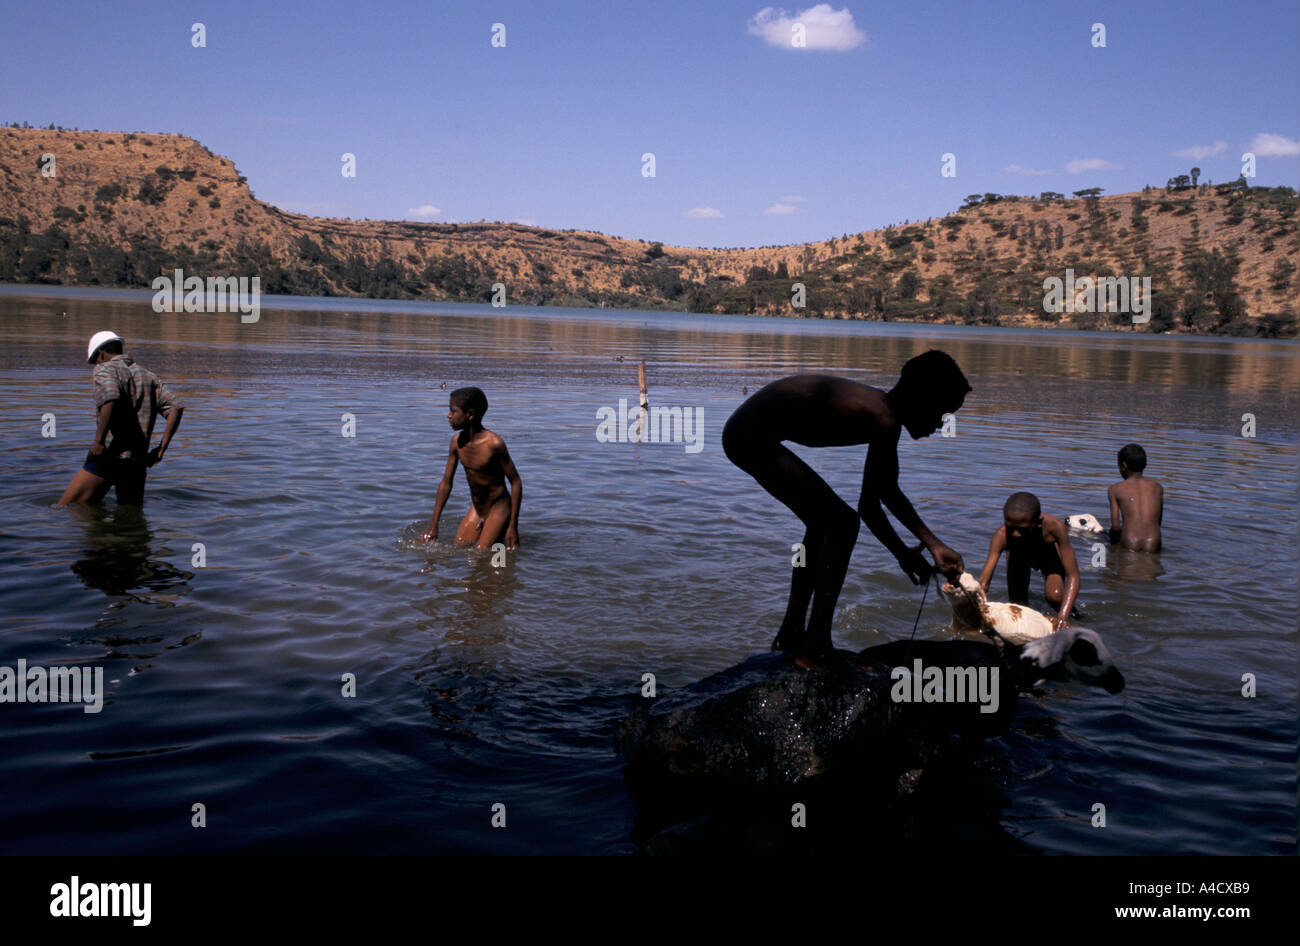 Villagers wash their animals in volcanic crater, Lake Hora at Debre Zeit, Ethiopia Stock Photo